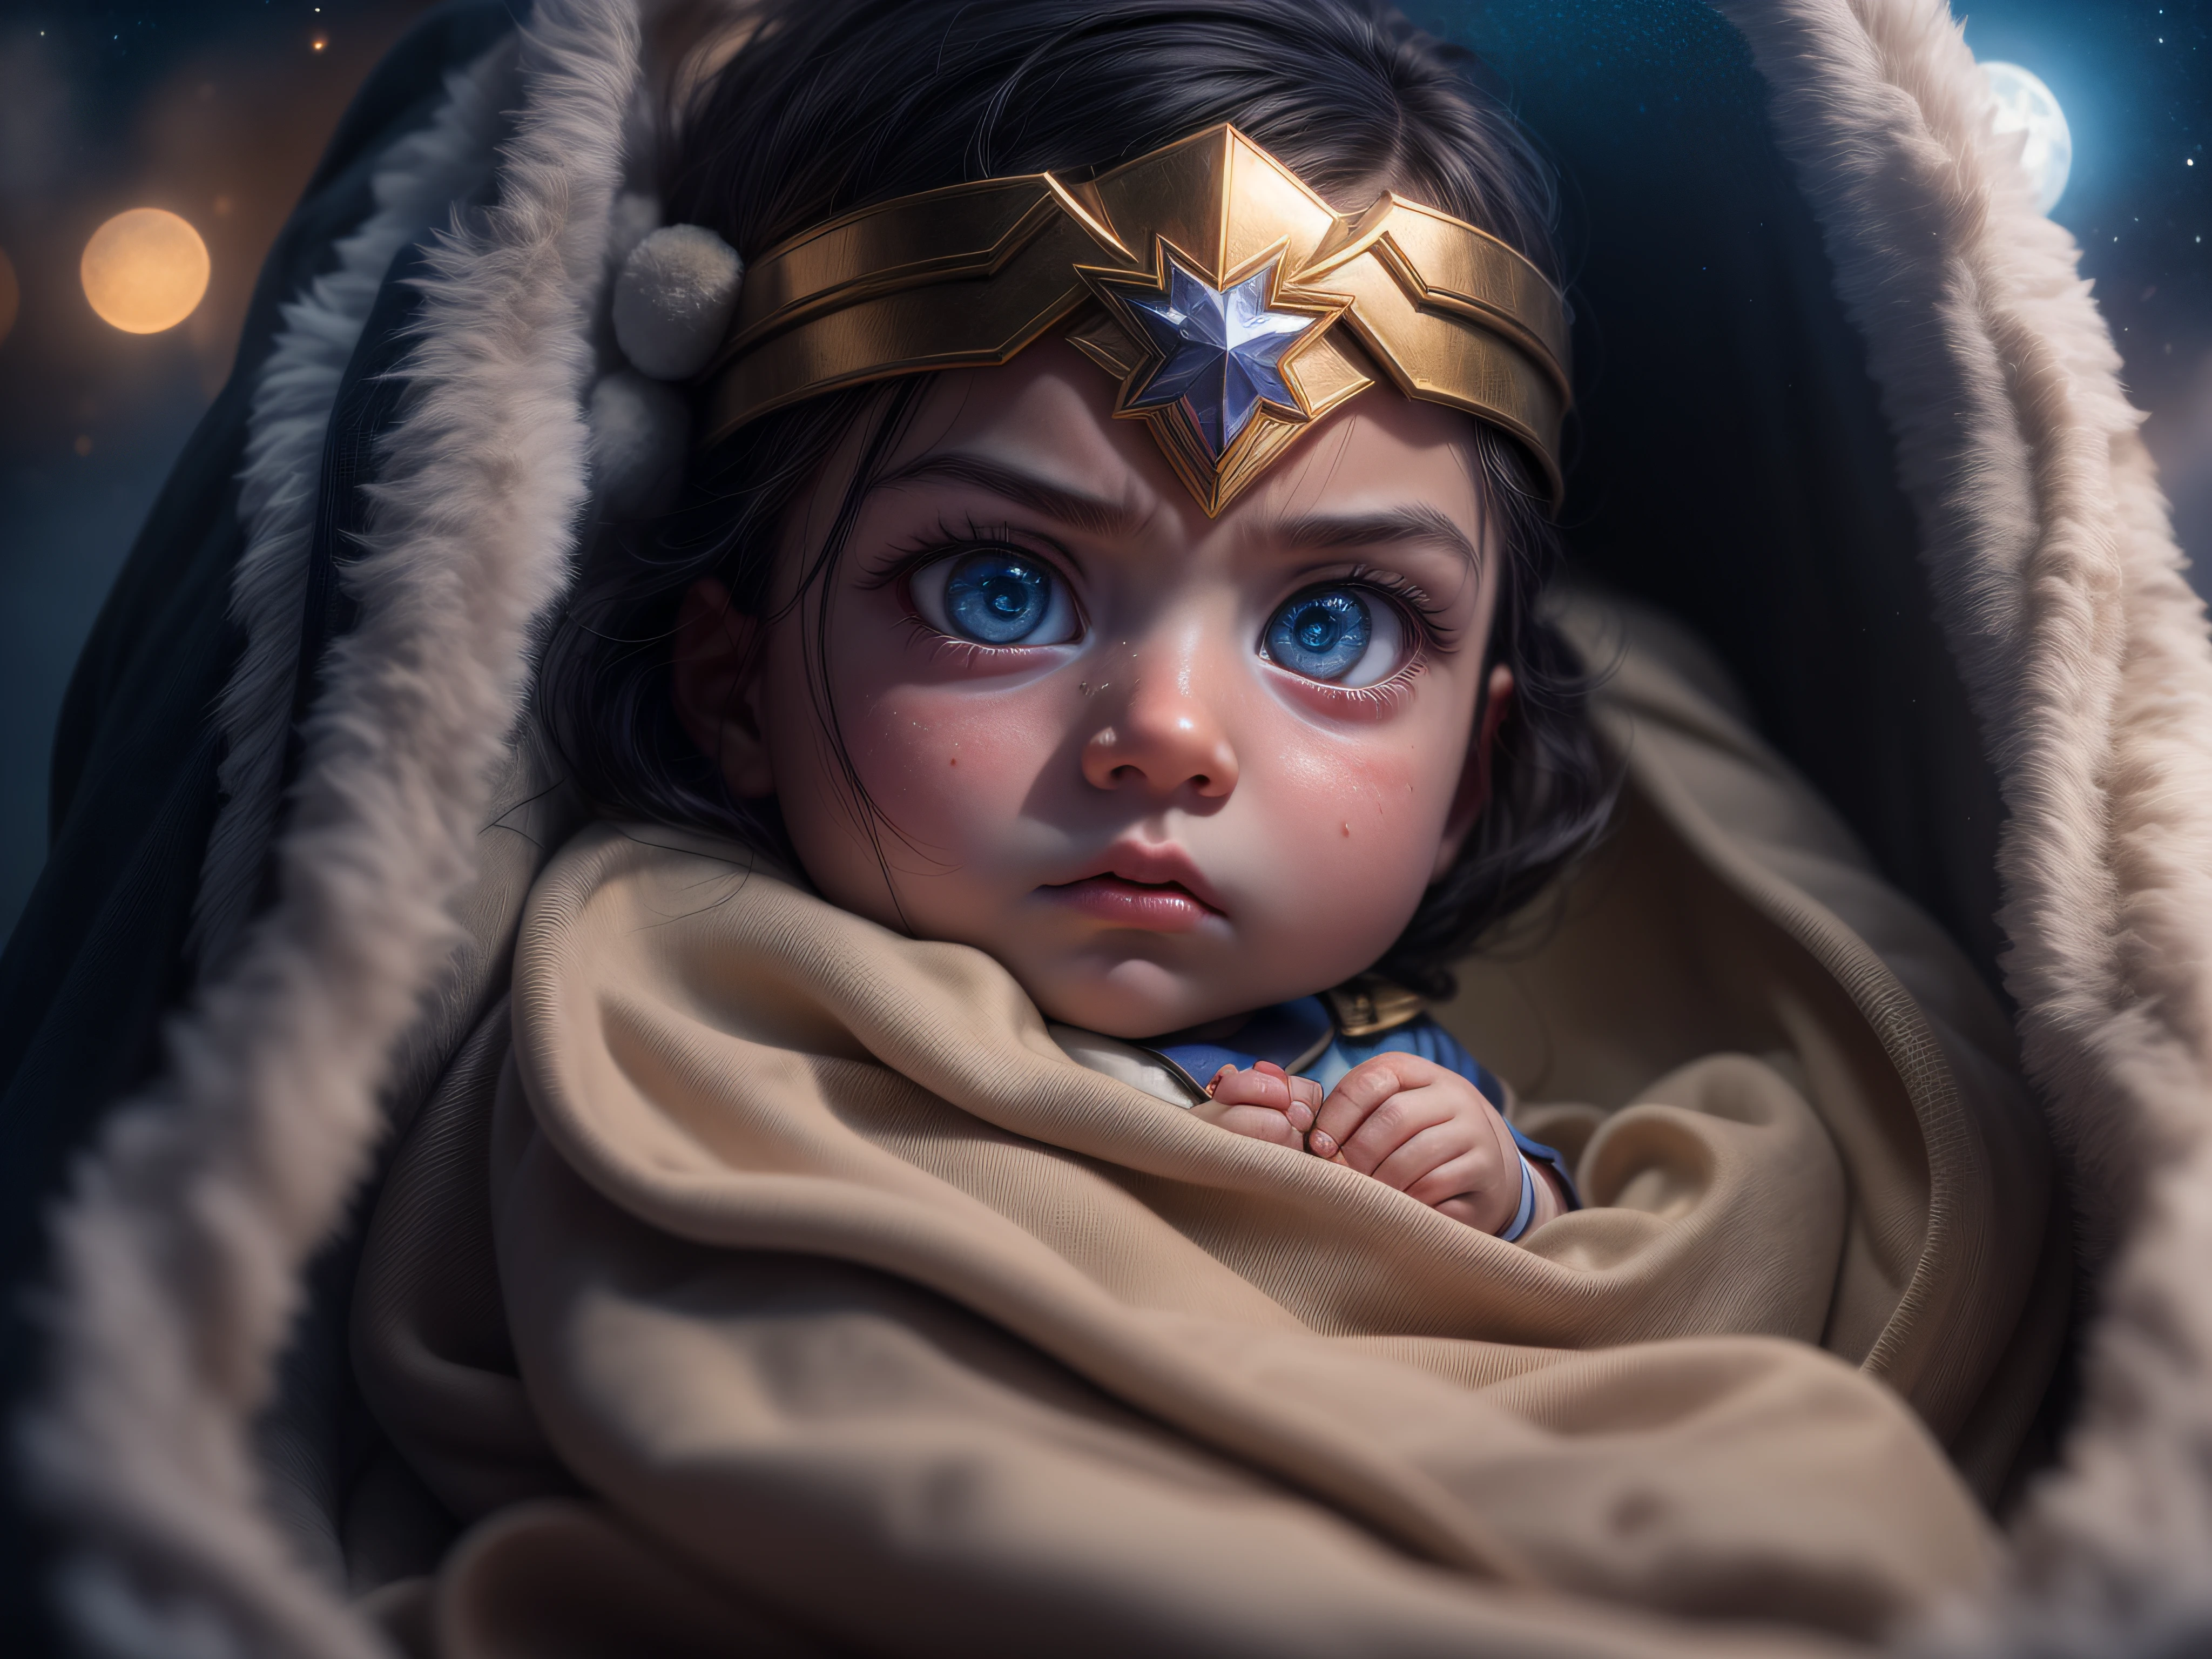 Close a powerful threat, The imposing appearance of the powerful baby-shaped Wonder Woman with gorgeous blue eyes dressed in beige uniform in a manger, menacing stare, ricamente detalhado, Hiper realista, 3D-rendering, obra-prima, NVIDIA, RTX, ray-traced, Bokeh, Night sky with a huge and beautiful full moon, estrelas brilhando, 8k,